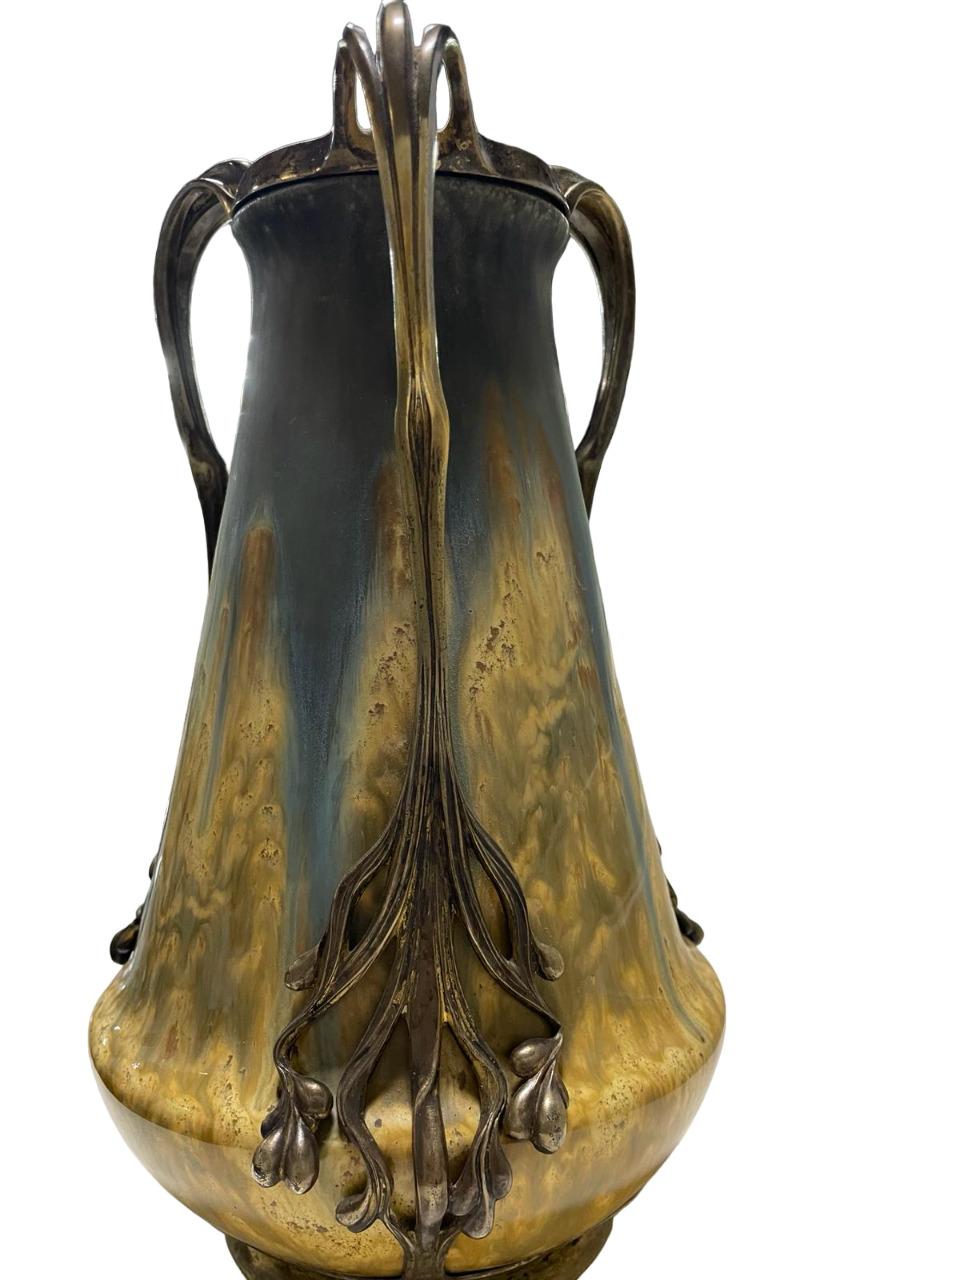 AN ORIVIT GILT BRONZE MOUNTED GLAZED CERAMIC VASE Germany, founded 1894 Stamped ORIVIT 2581
The company was founded in 1894 as 